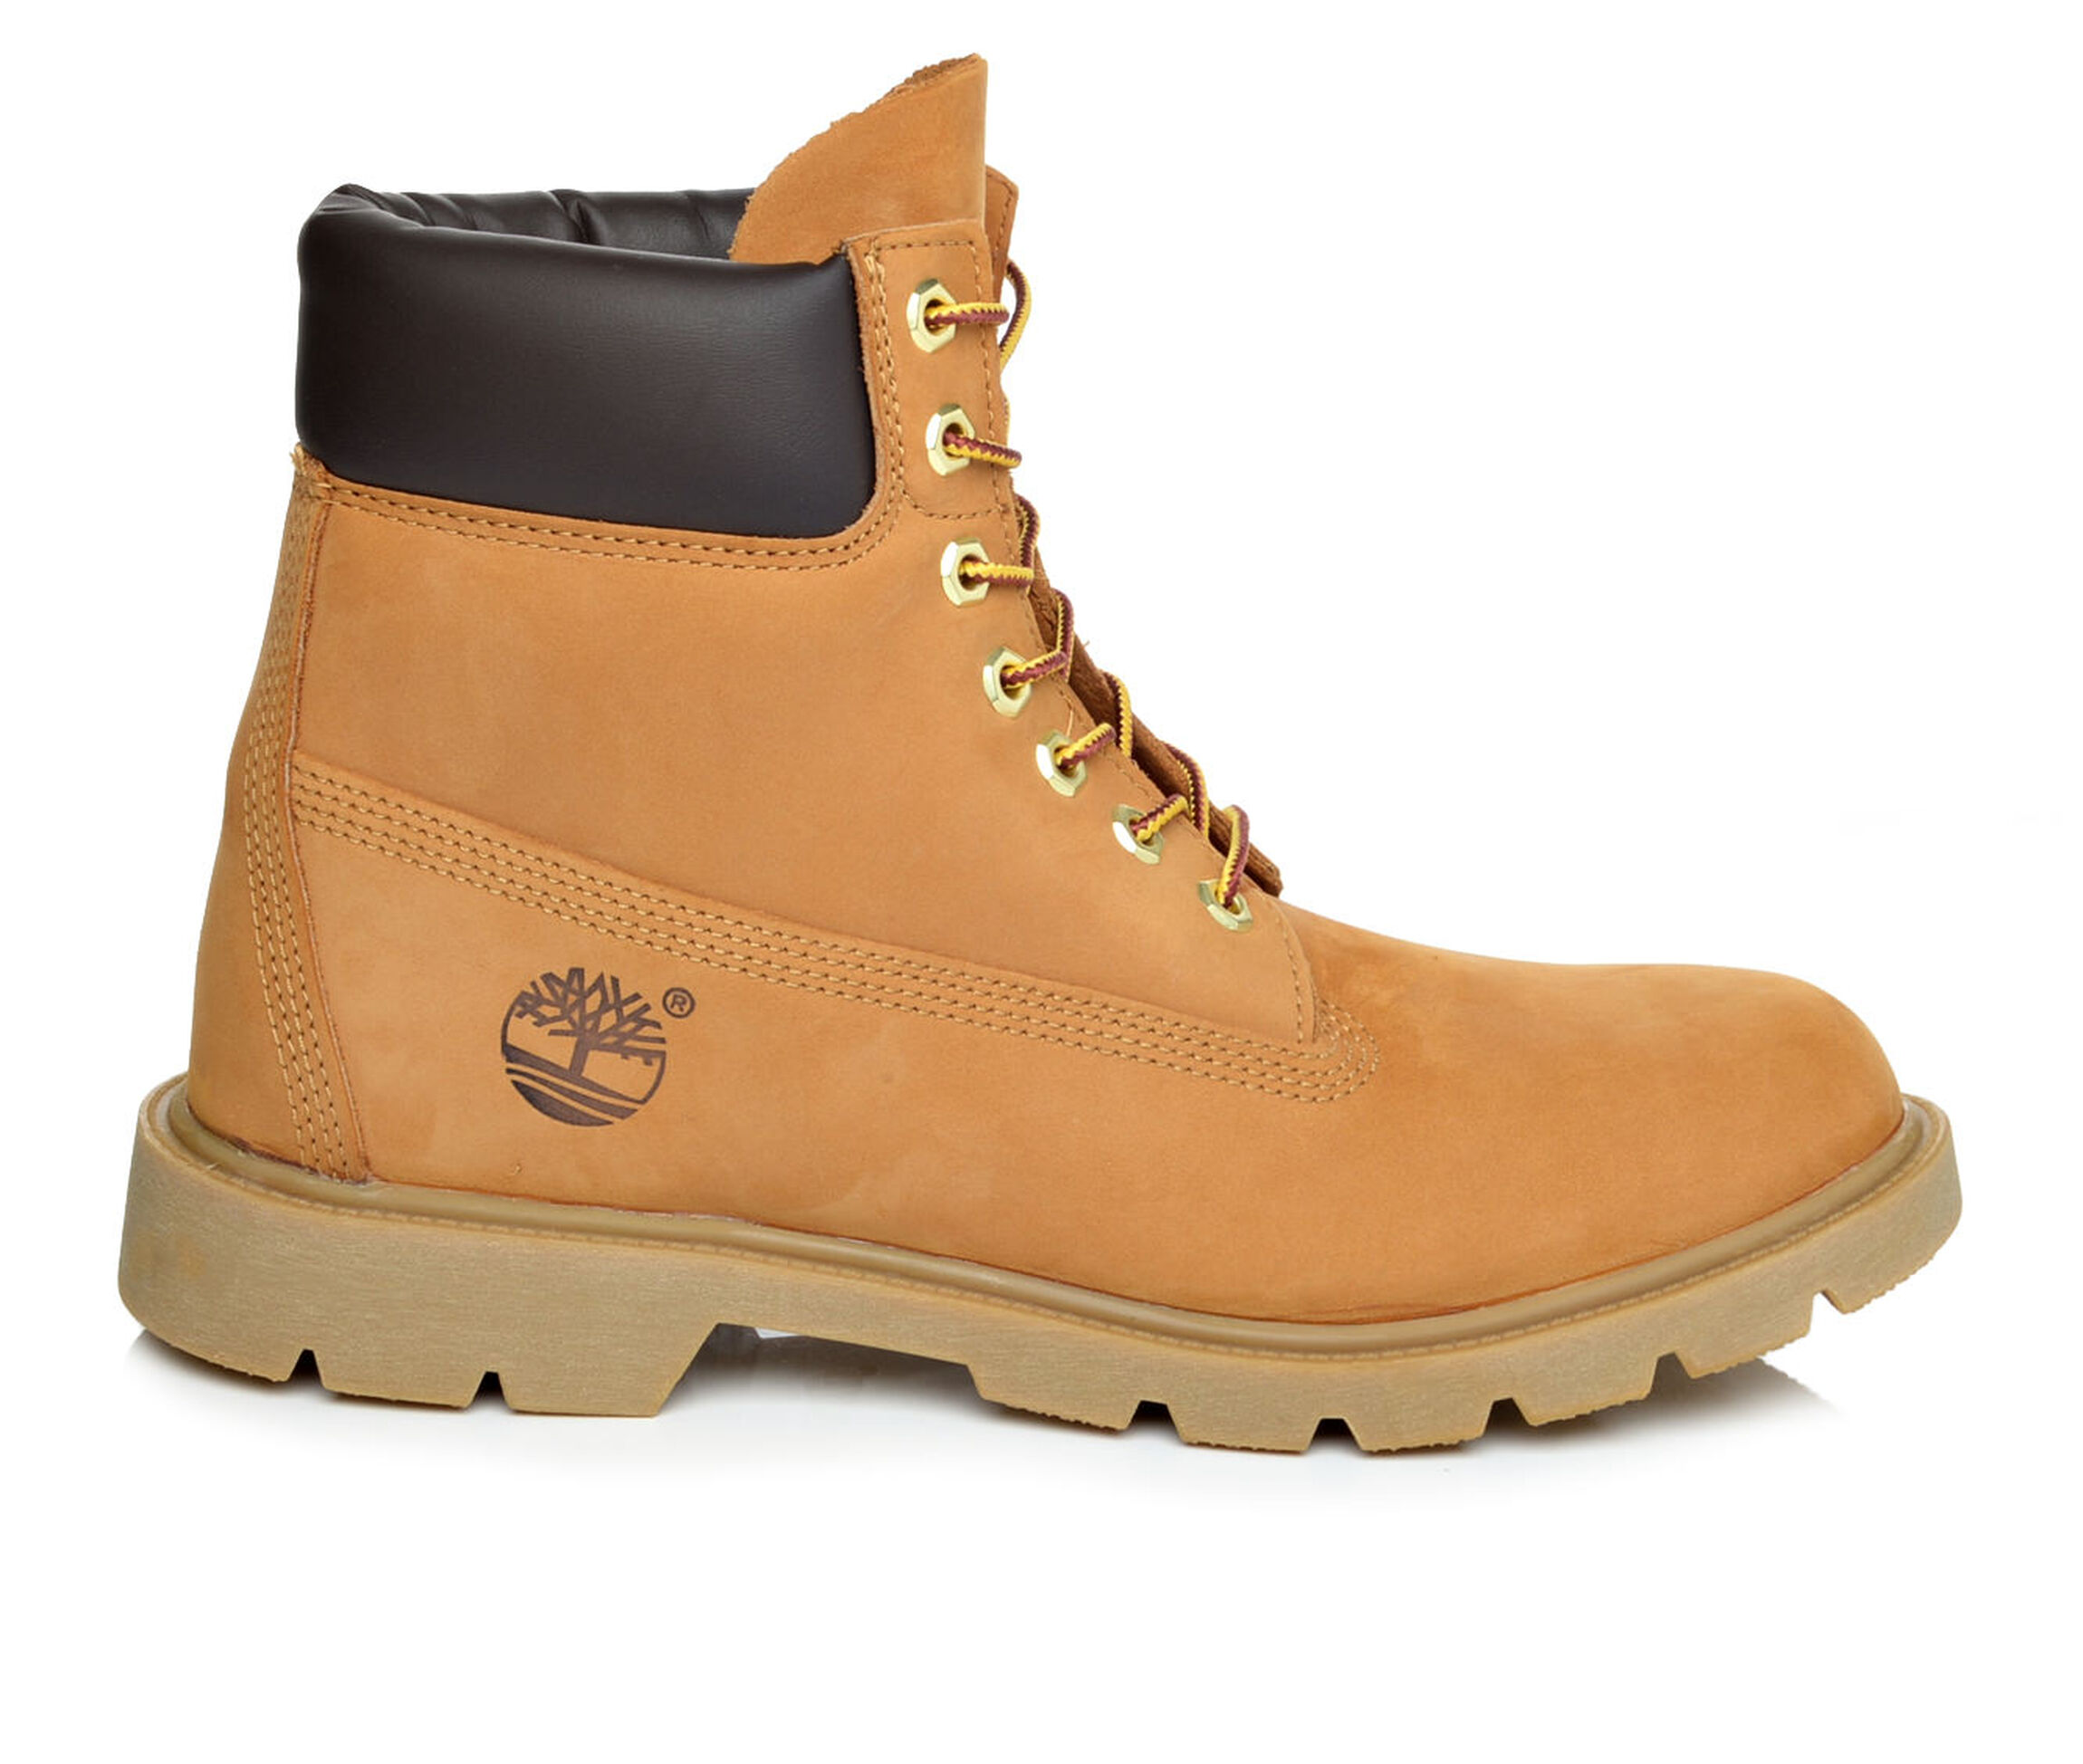 Timberland & Shoes | Shoe Carnival